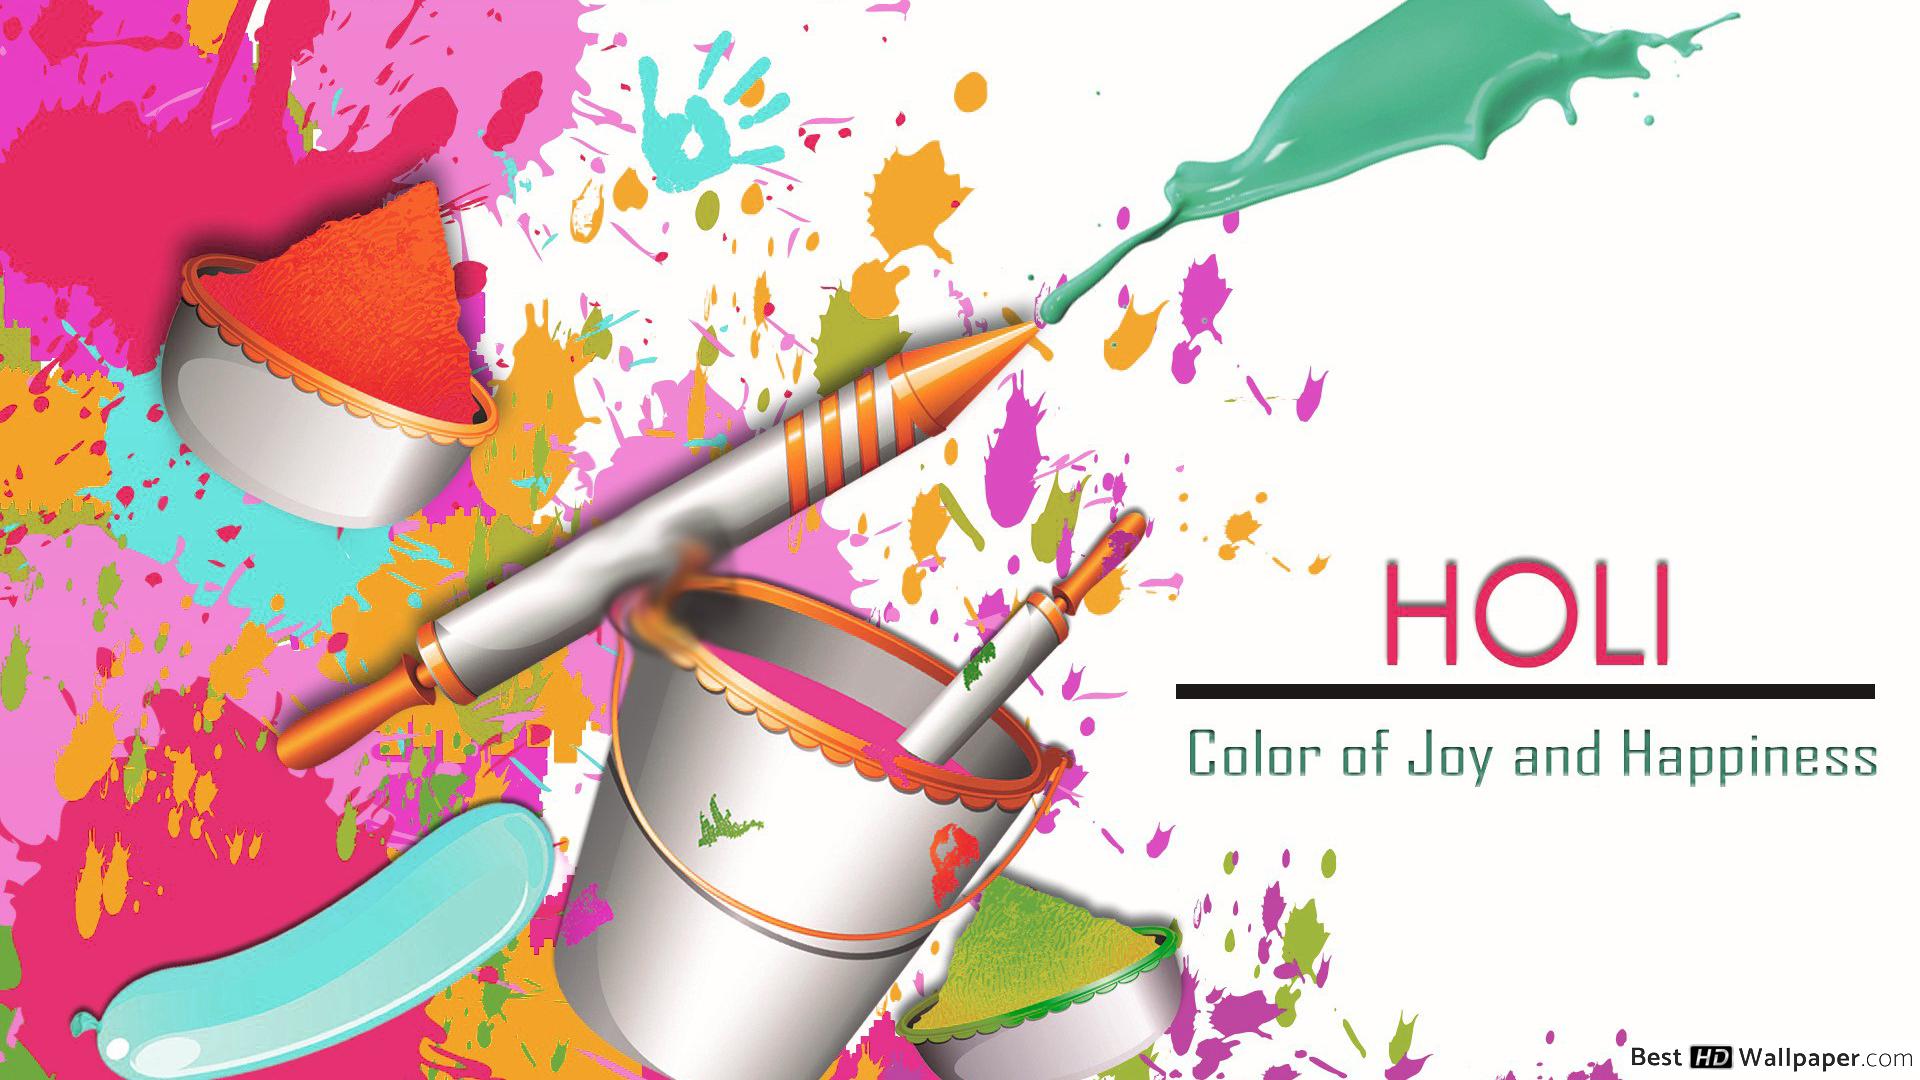 Holi of joy and happiness HD wallpaper download